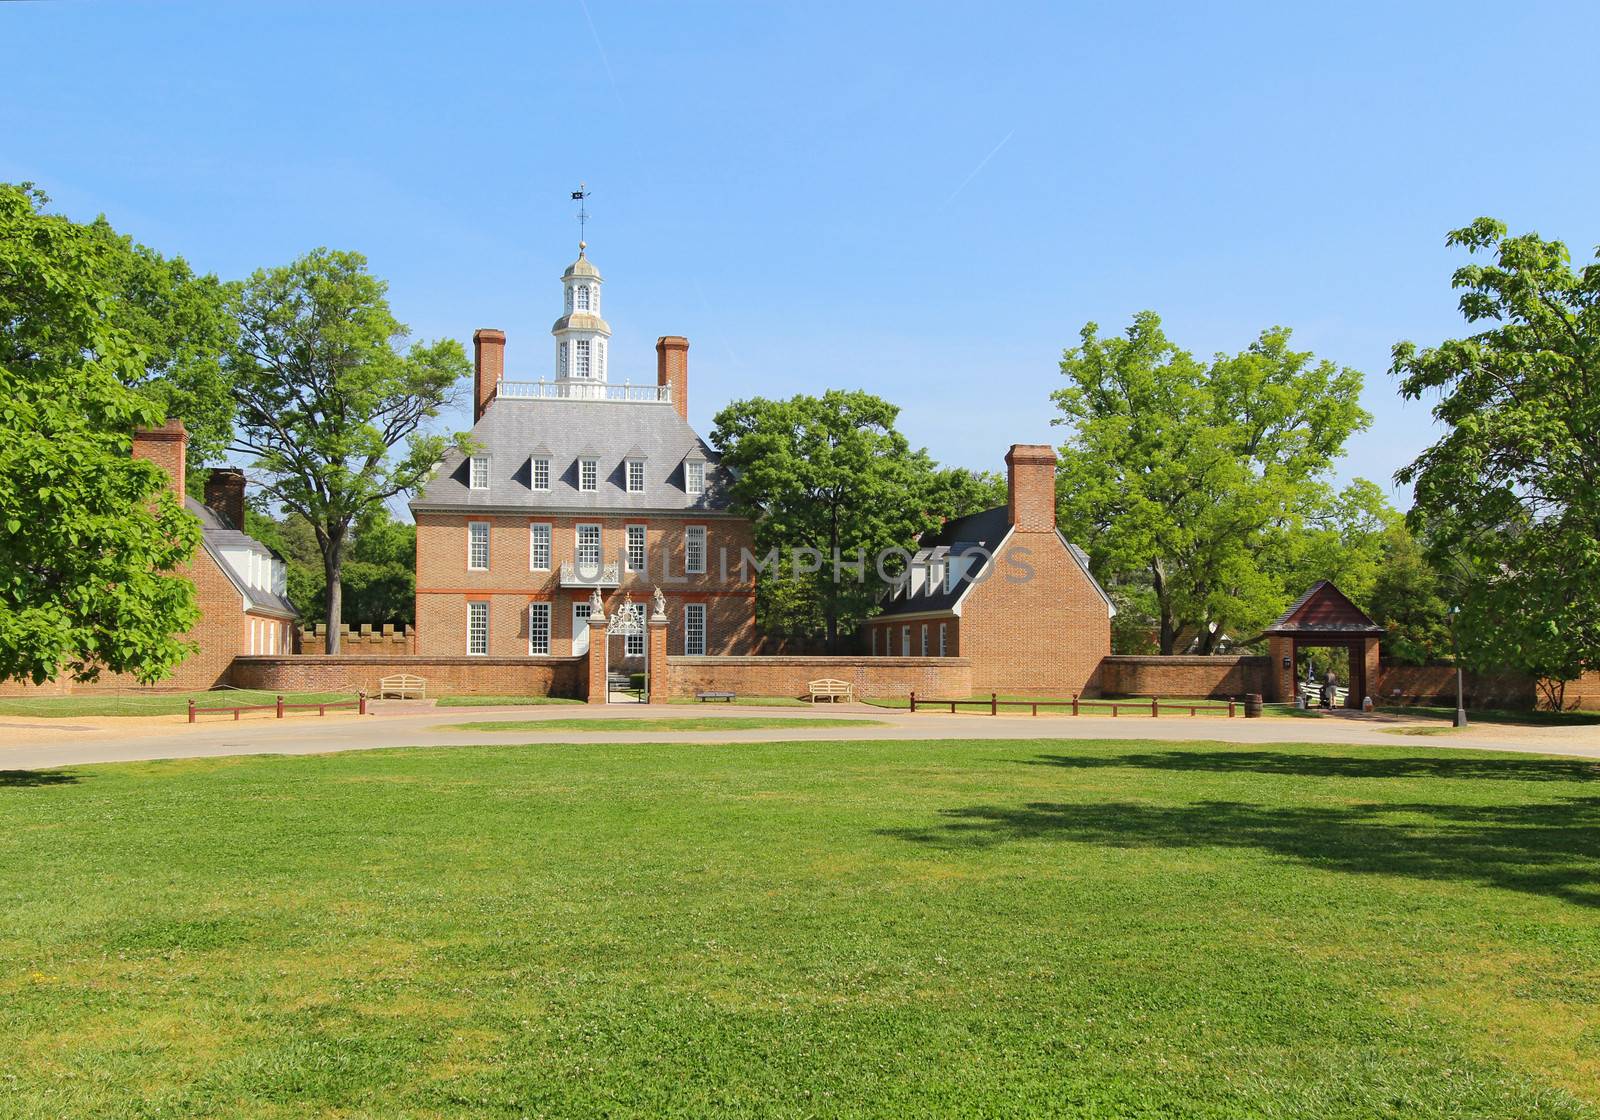 The Governors Palace Building in Colonial Williamsburg, Virginia by sgoodwin4813